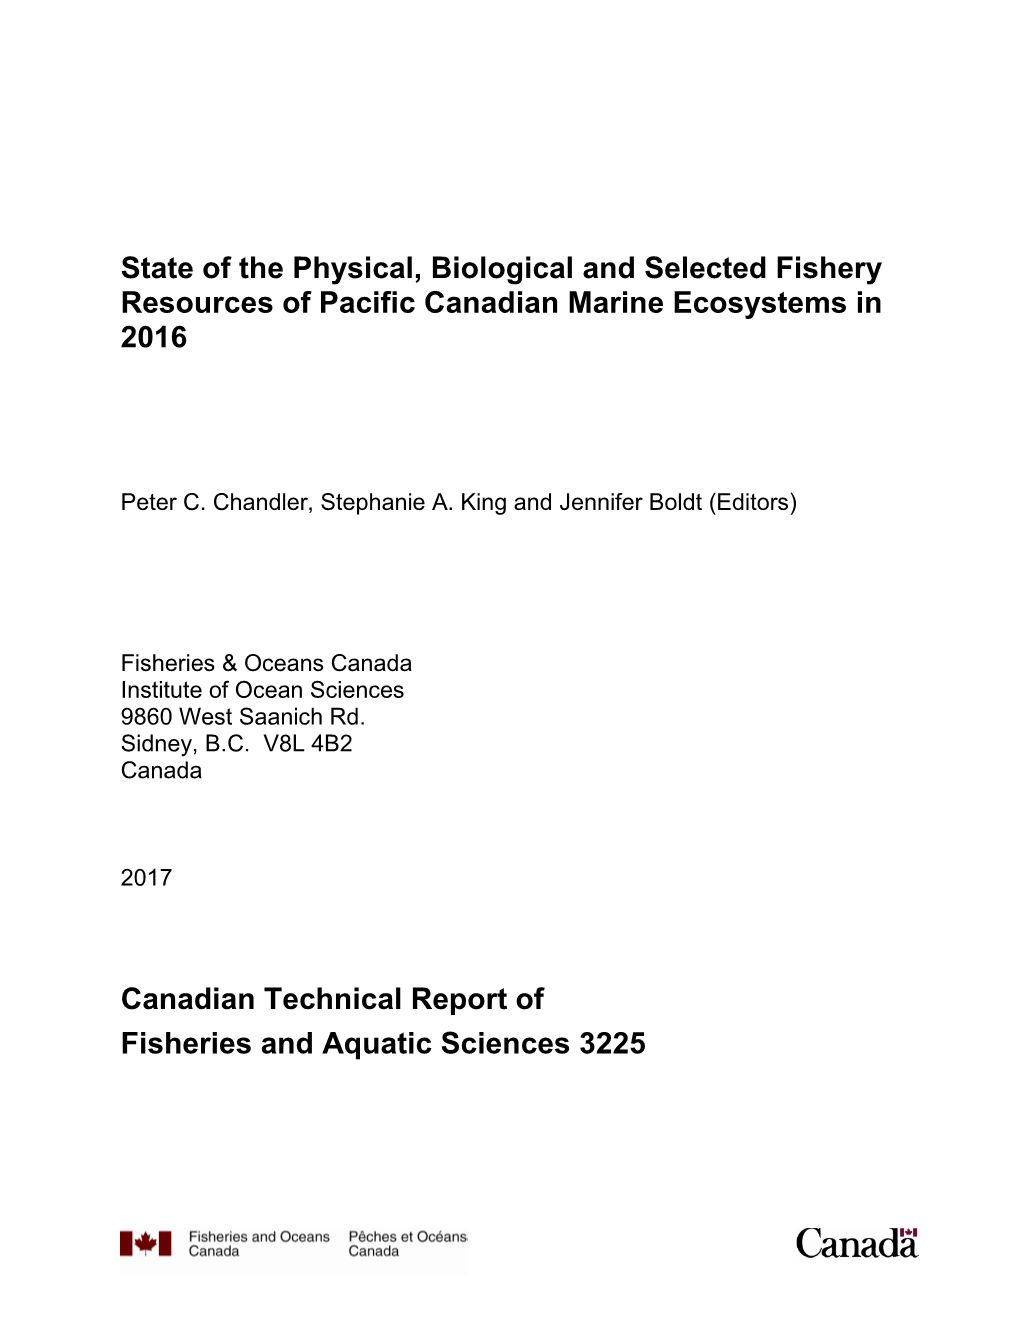 State of the Physical, Biological and Selected Fishery Resources of Pacific Canadian Marine Ecosystems in 2016